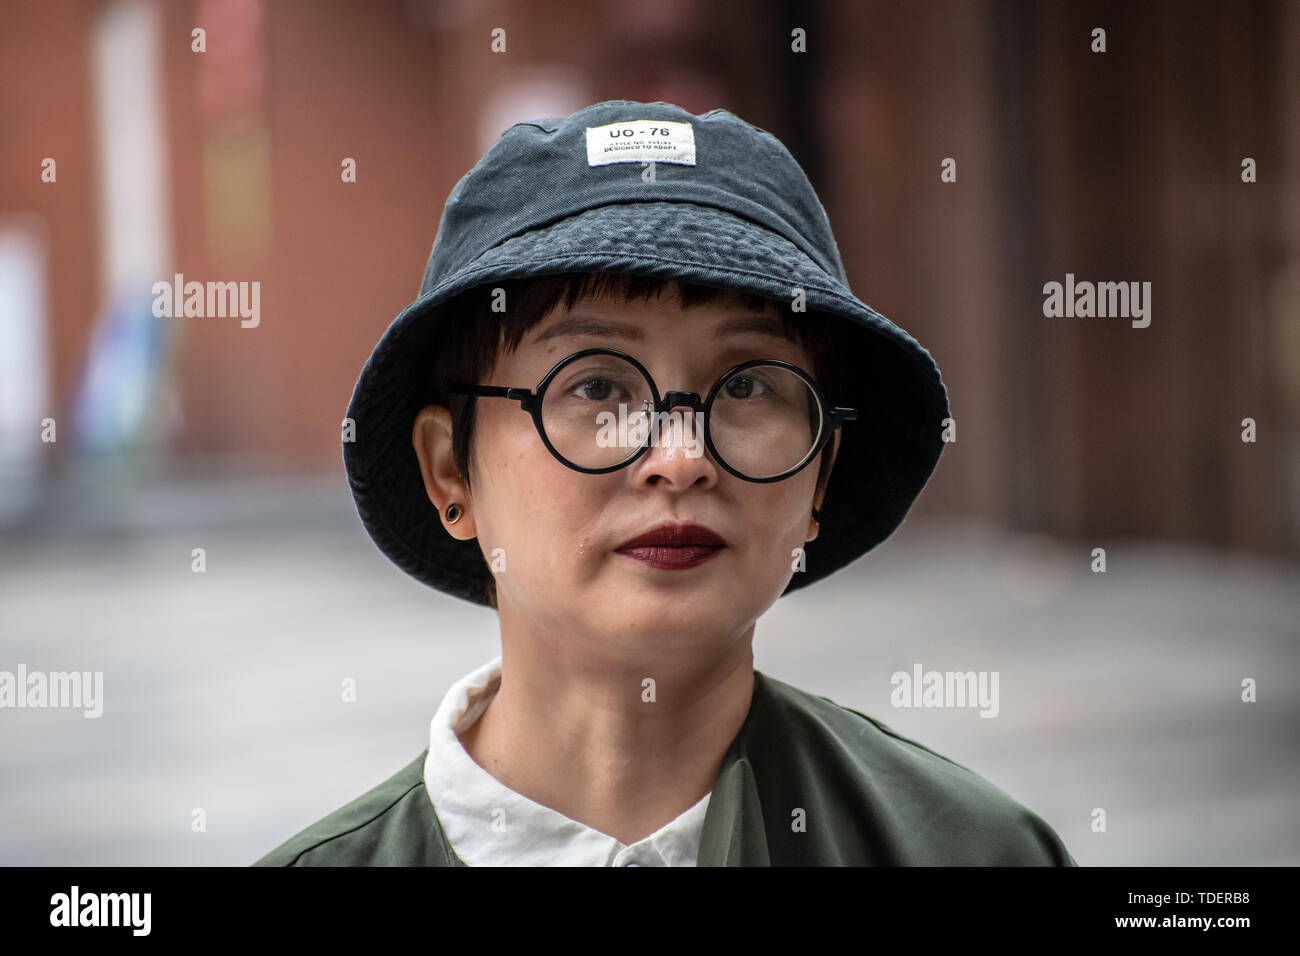 London, UK. London, UK. Tourists street photography in London Chinatown Sweet Tooth Cafe and Restaurant at Newport Court and Garret Street on 15 June 2019, UK. Credit: Picture Capital/Alamy Live News Credit: Picture Capital/Alamy Live News Stock Photo